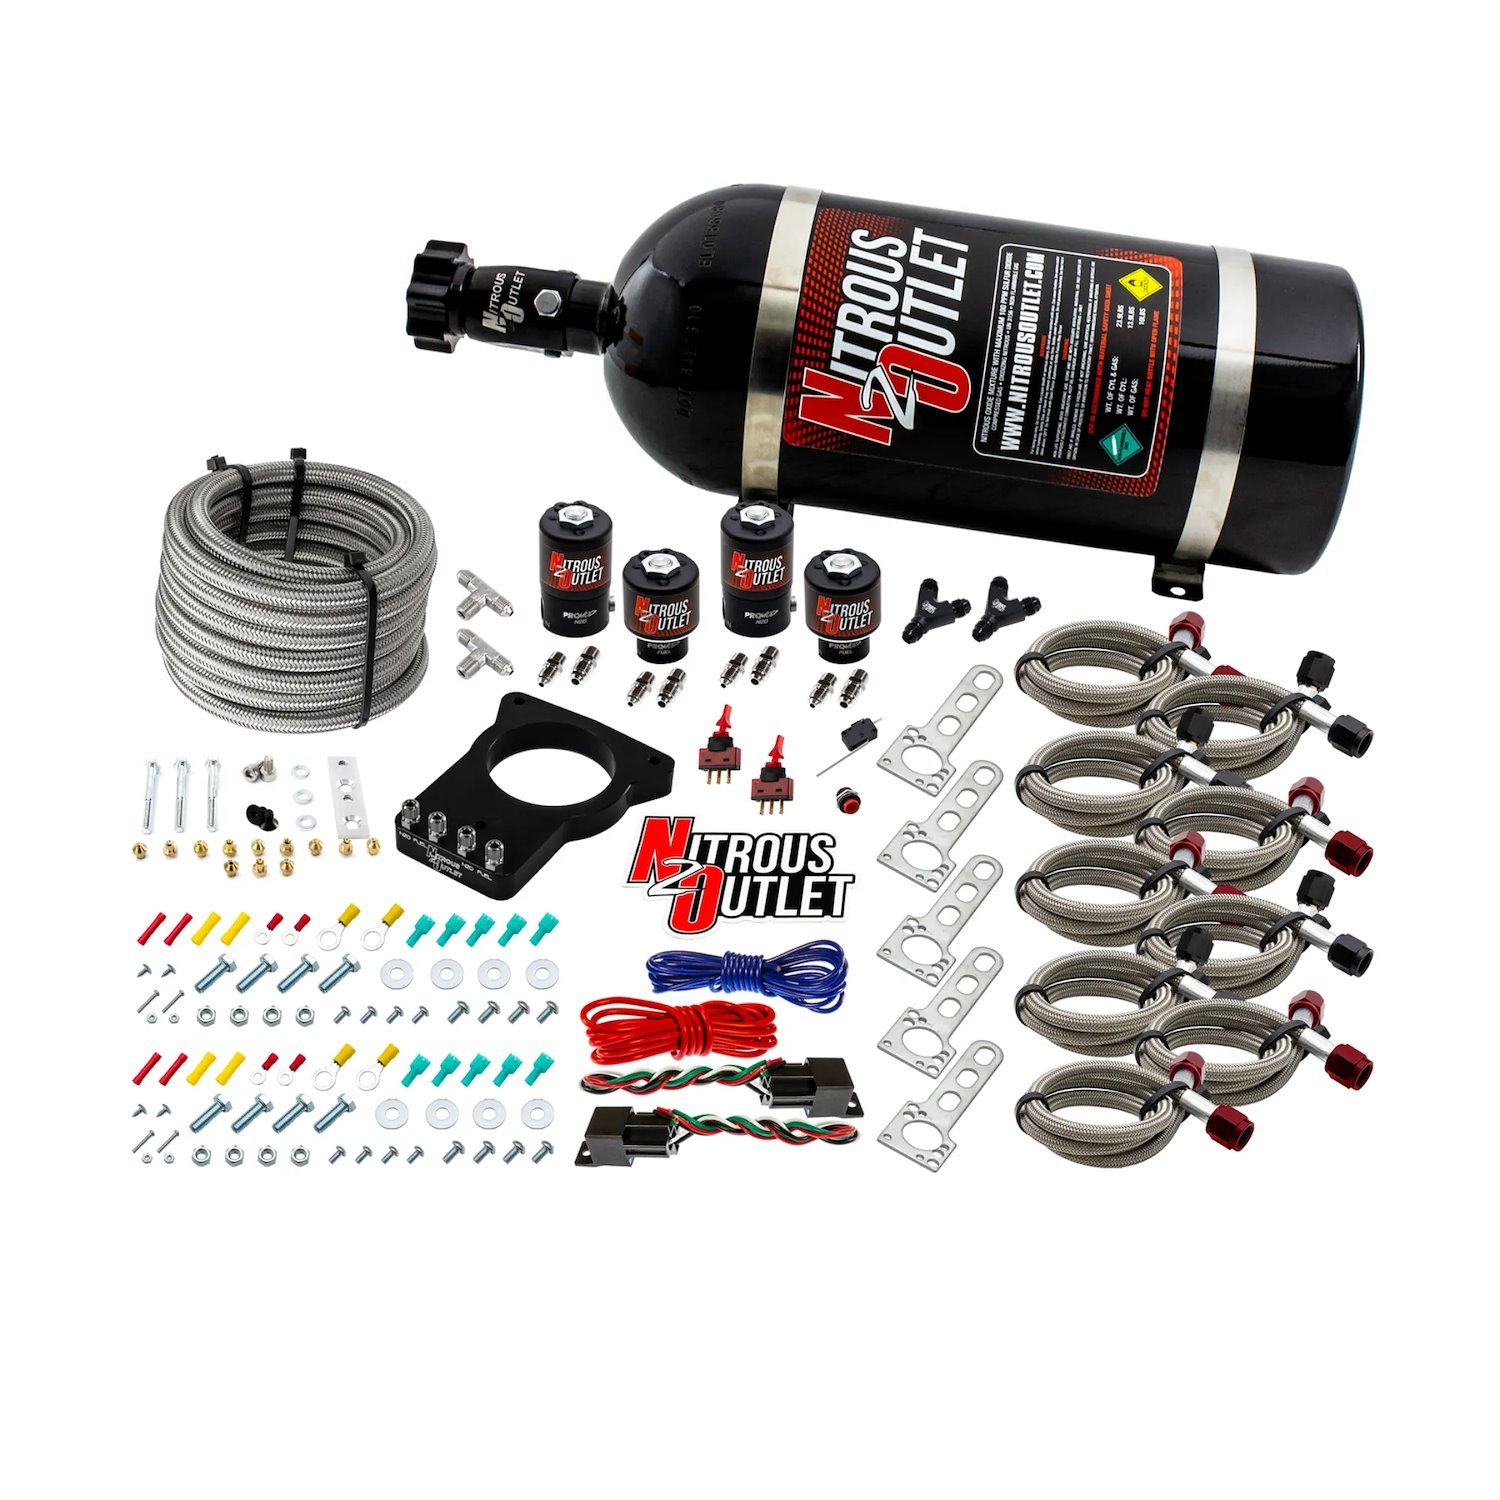 00-10103-10 GM 78 mm Dual-Stage LSX Plate System, Gas/E85, 5-55psi, 50-200HP, 10lb Bottle